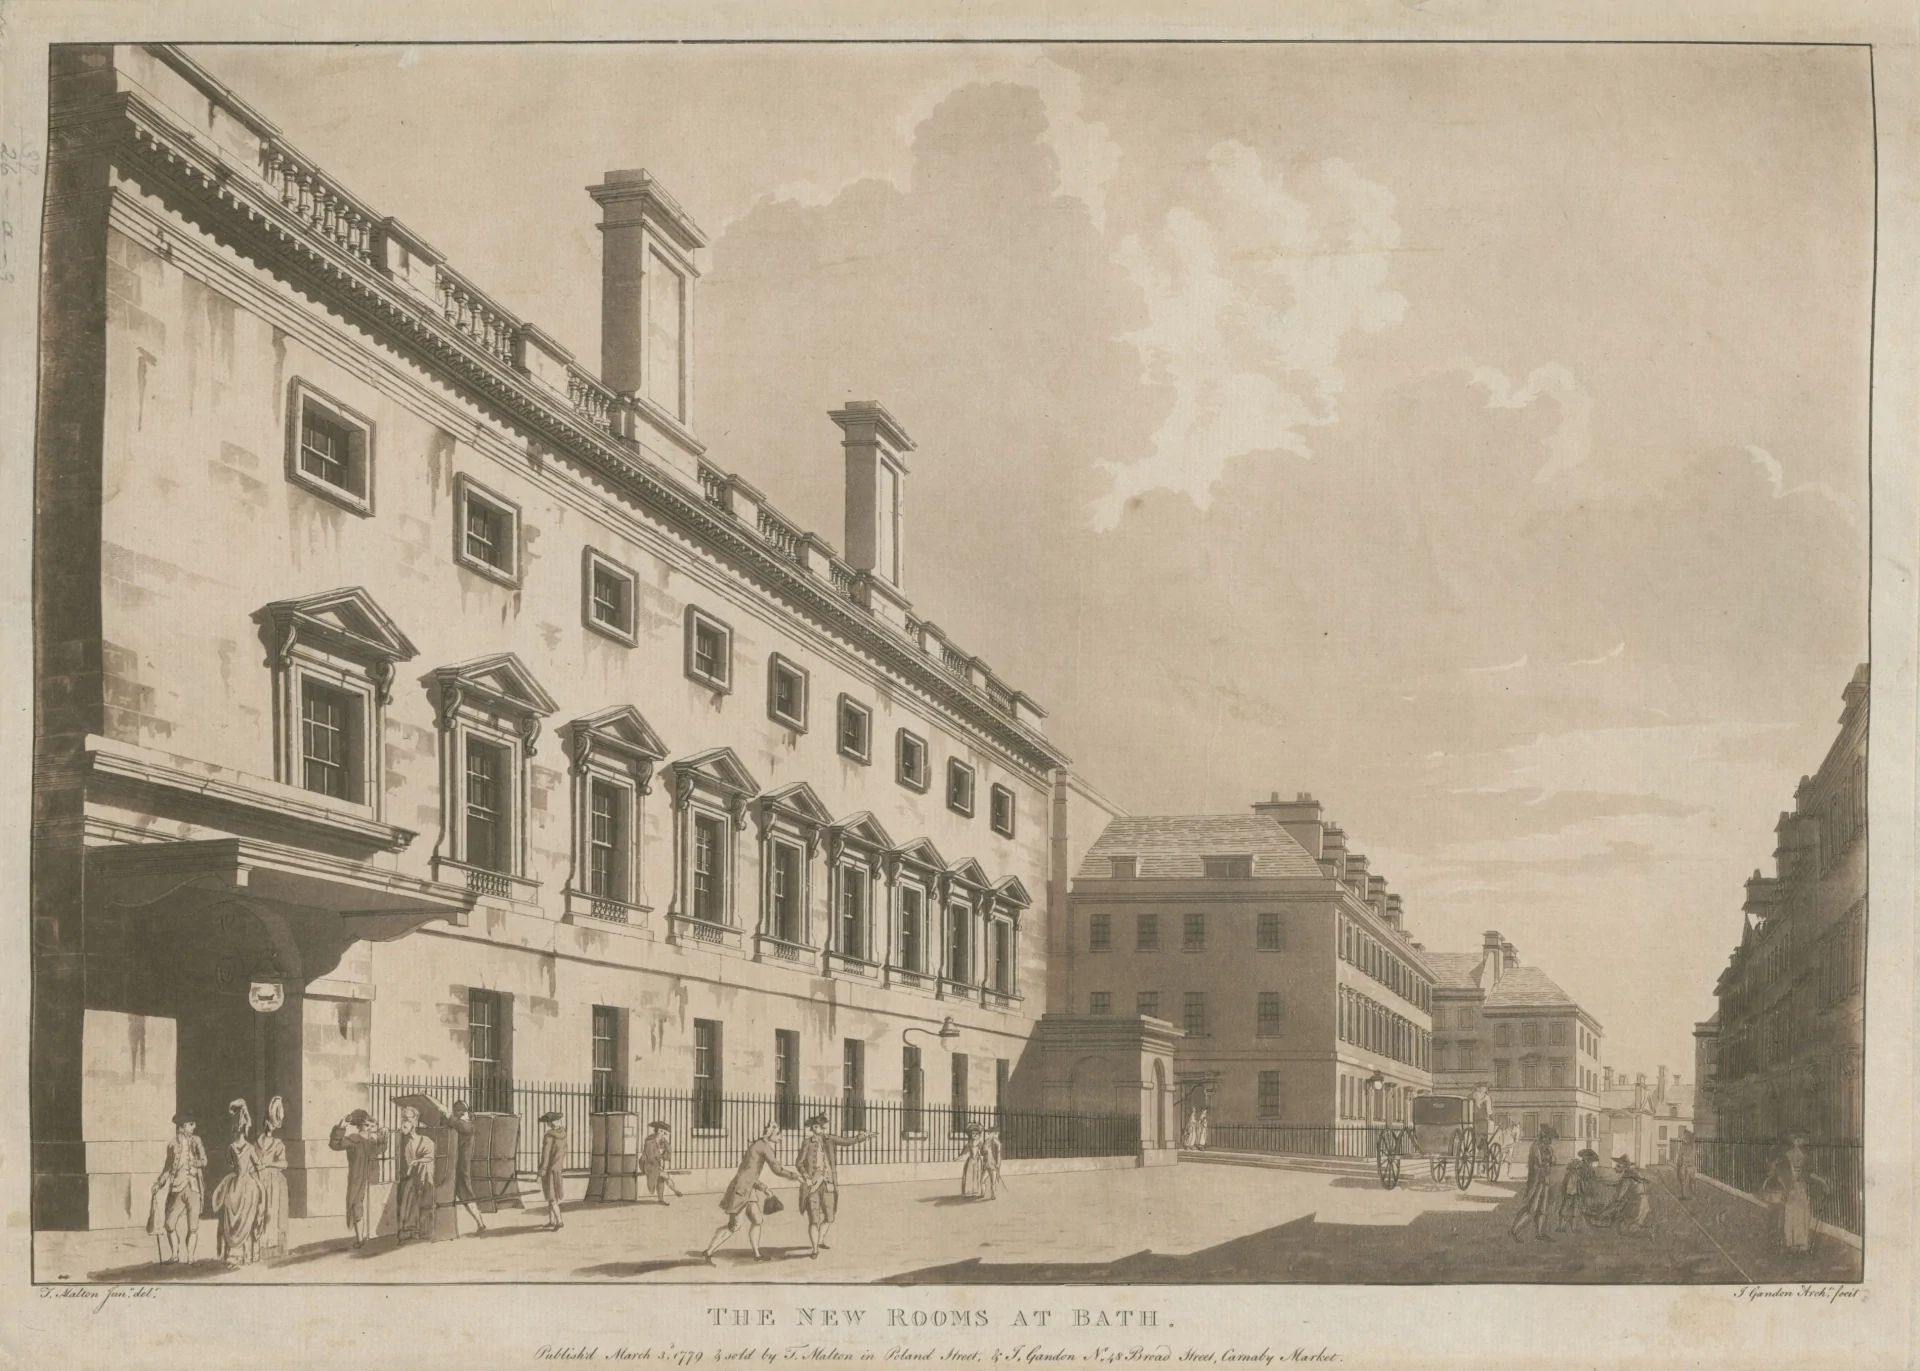 A historical drawing of the Assembly Rooms in Bath.